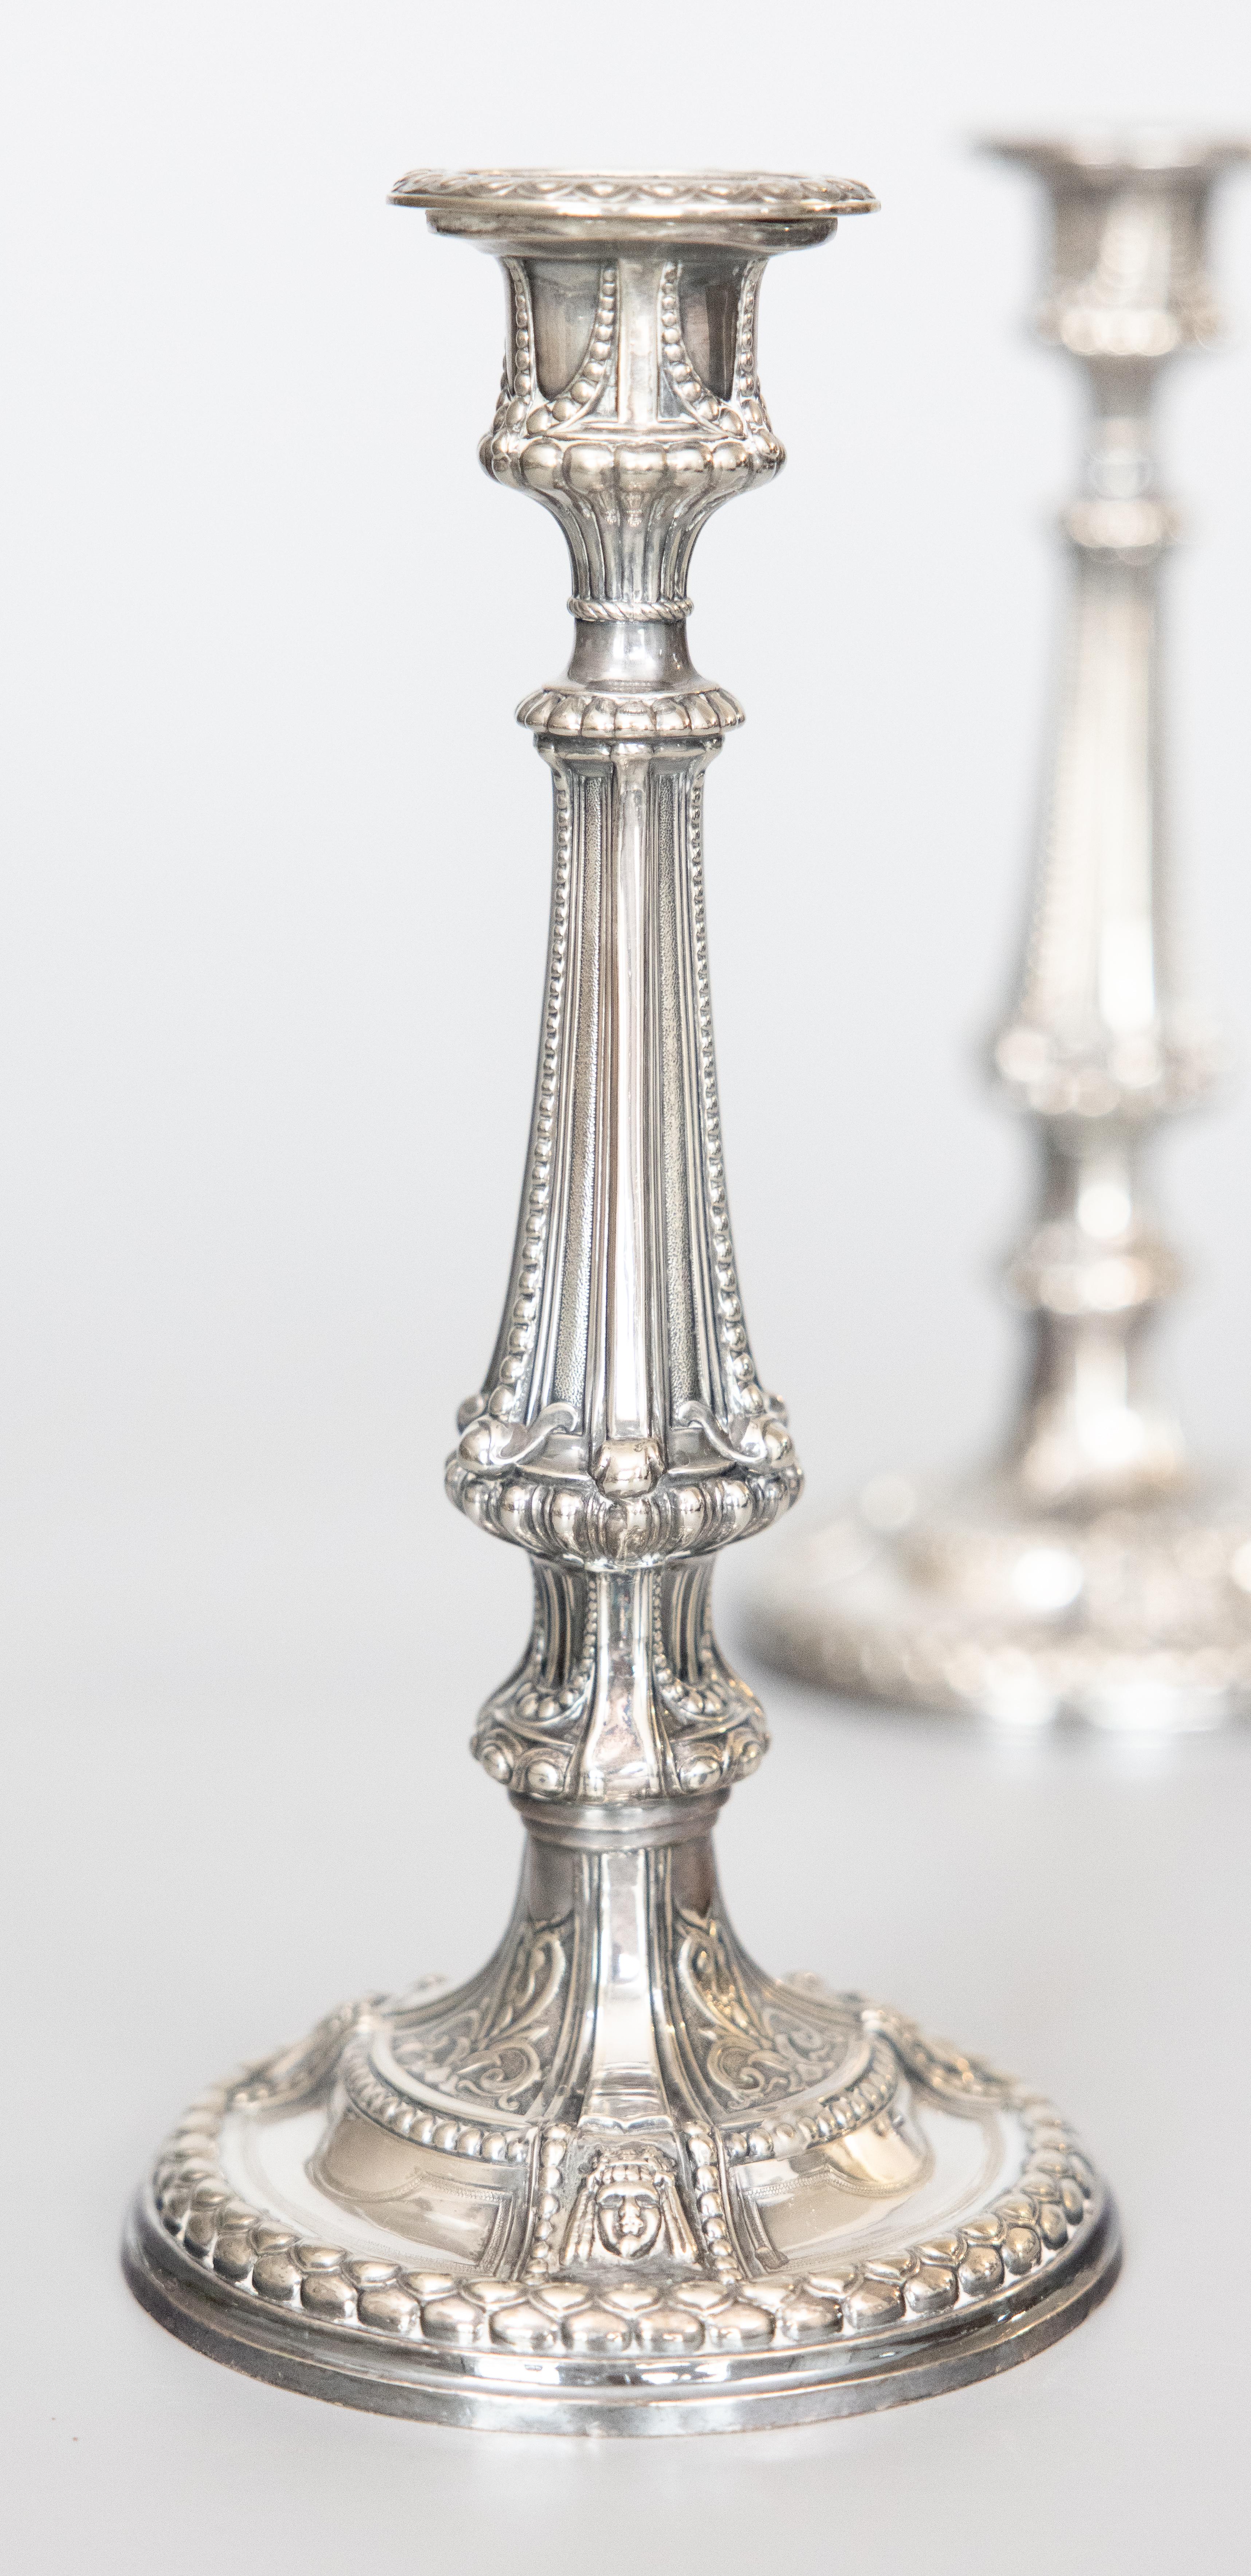 Pair of Antique Neoclassical Style English Silver Plate Candlesticks c. 1900 In Good Condition For Sale In Pearland, TX